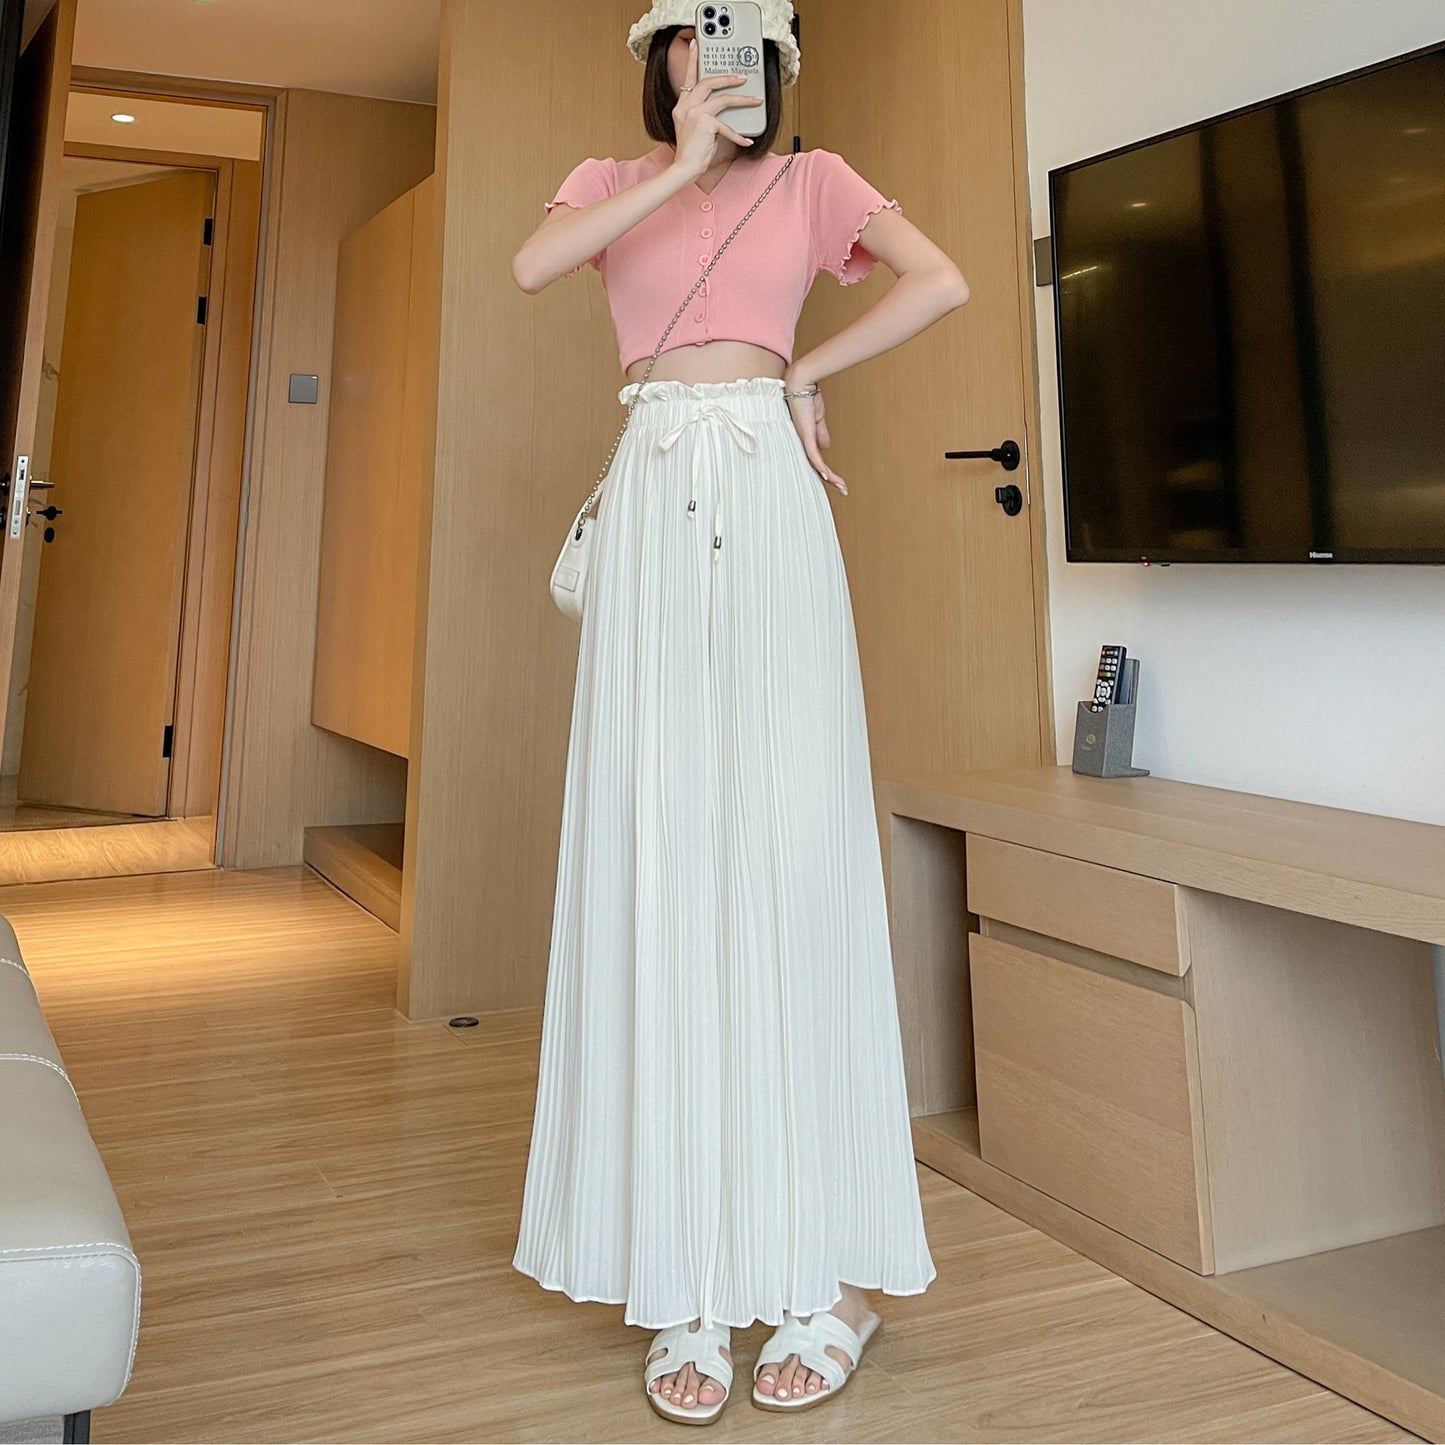 Pleated Chiffon Loose Fit High-Waisted Culottes Draping Pants